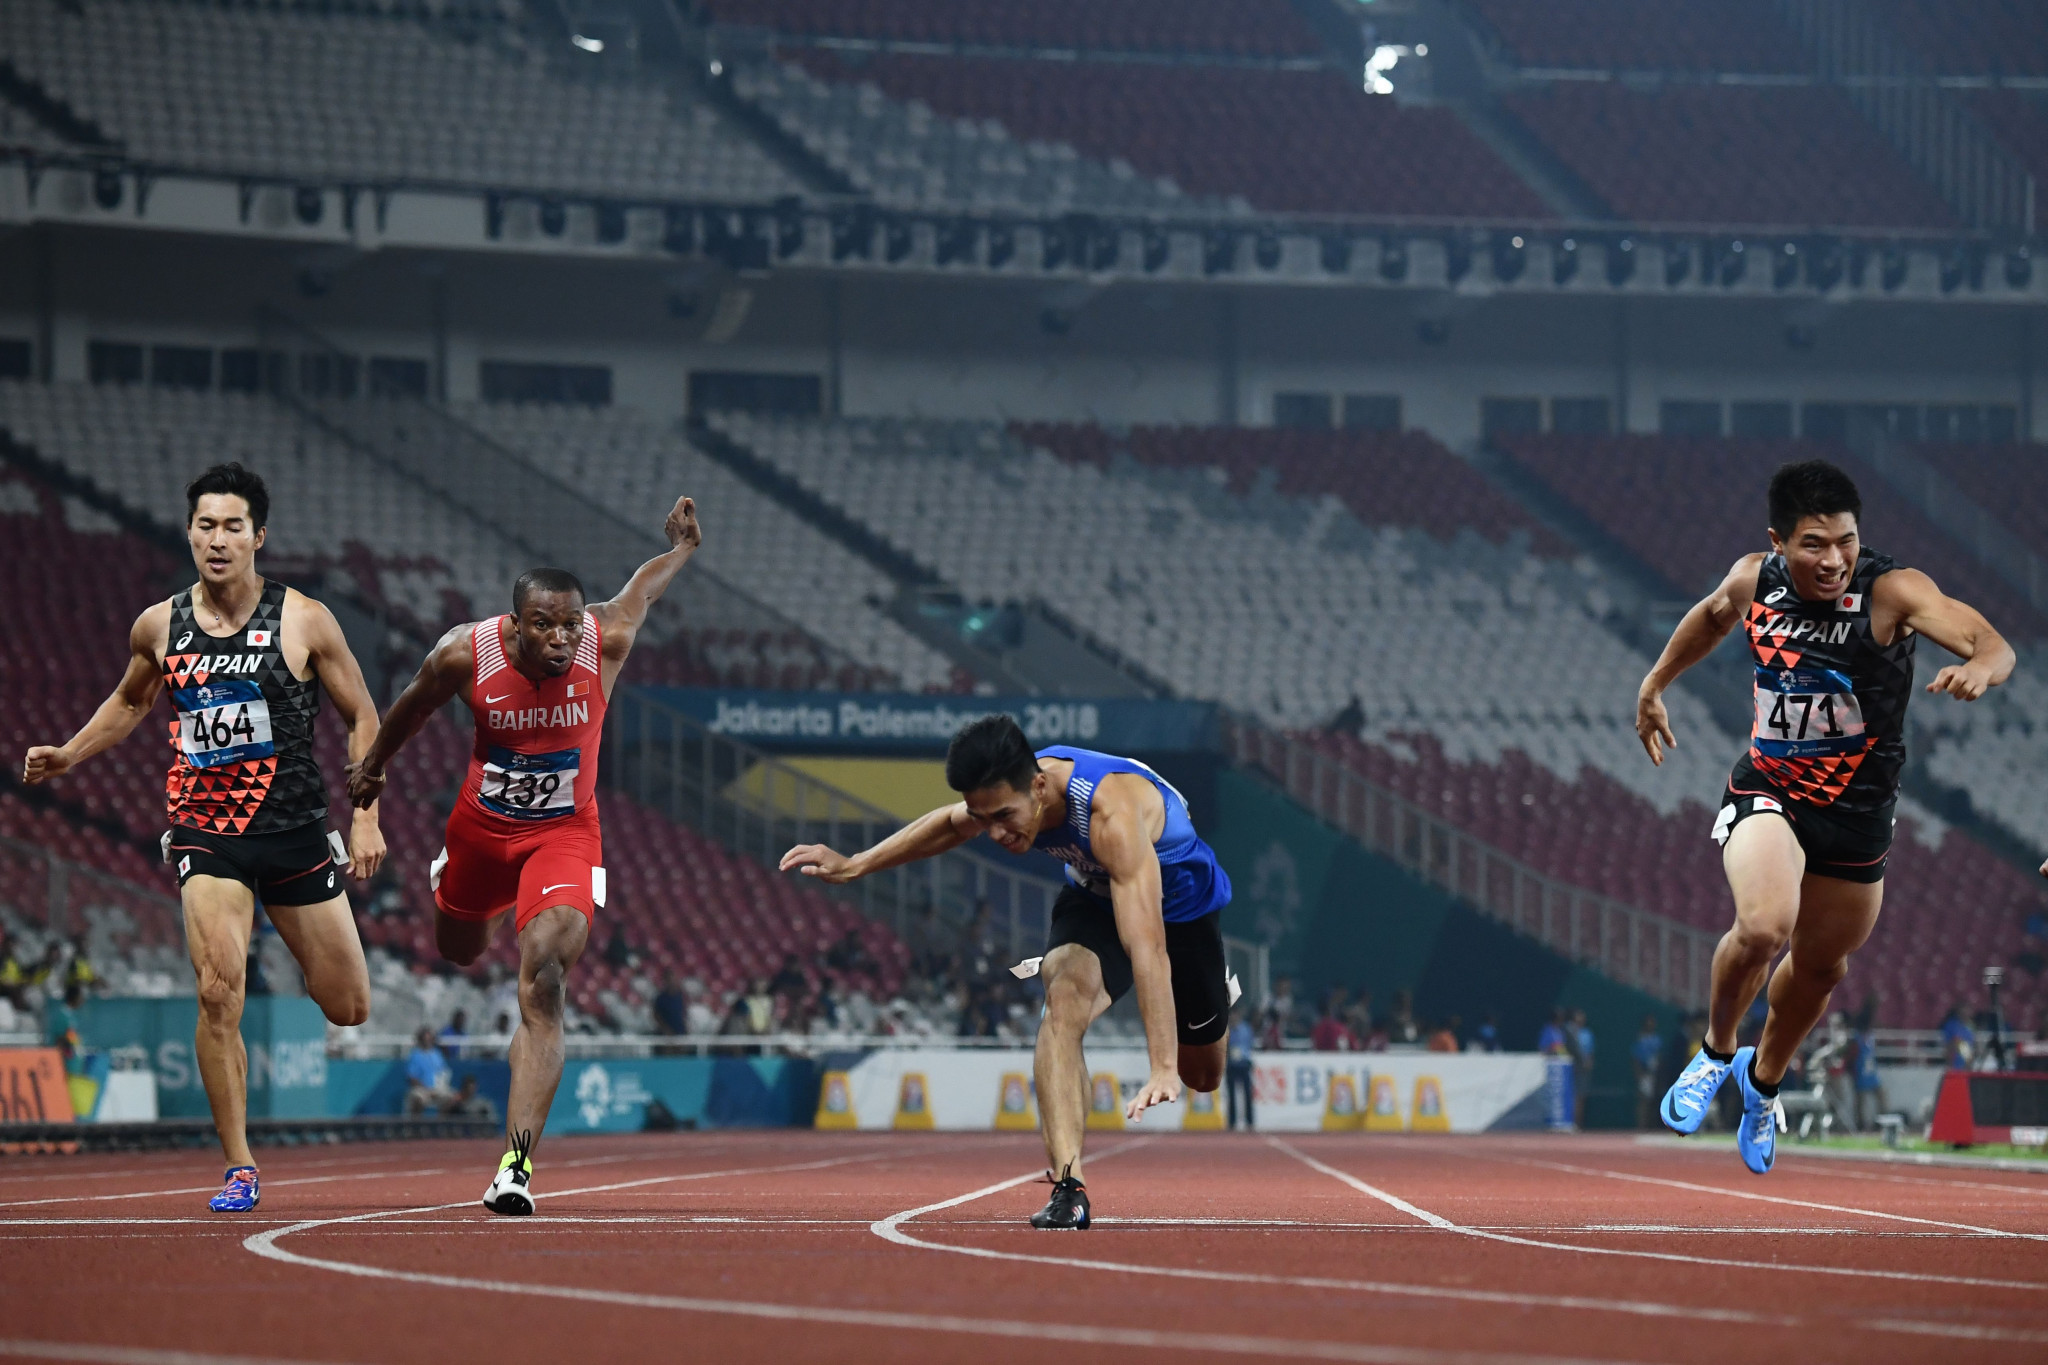 Chunhan Yang, centre, dipped for the line too early in the men's 200m and lost his balance, meaning Yuki Kioke, right, snatched the gold ©Getty Images